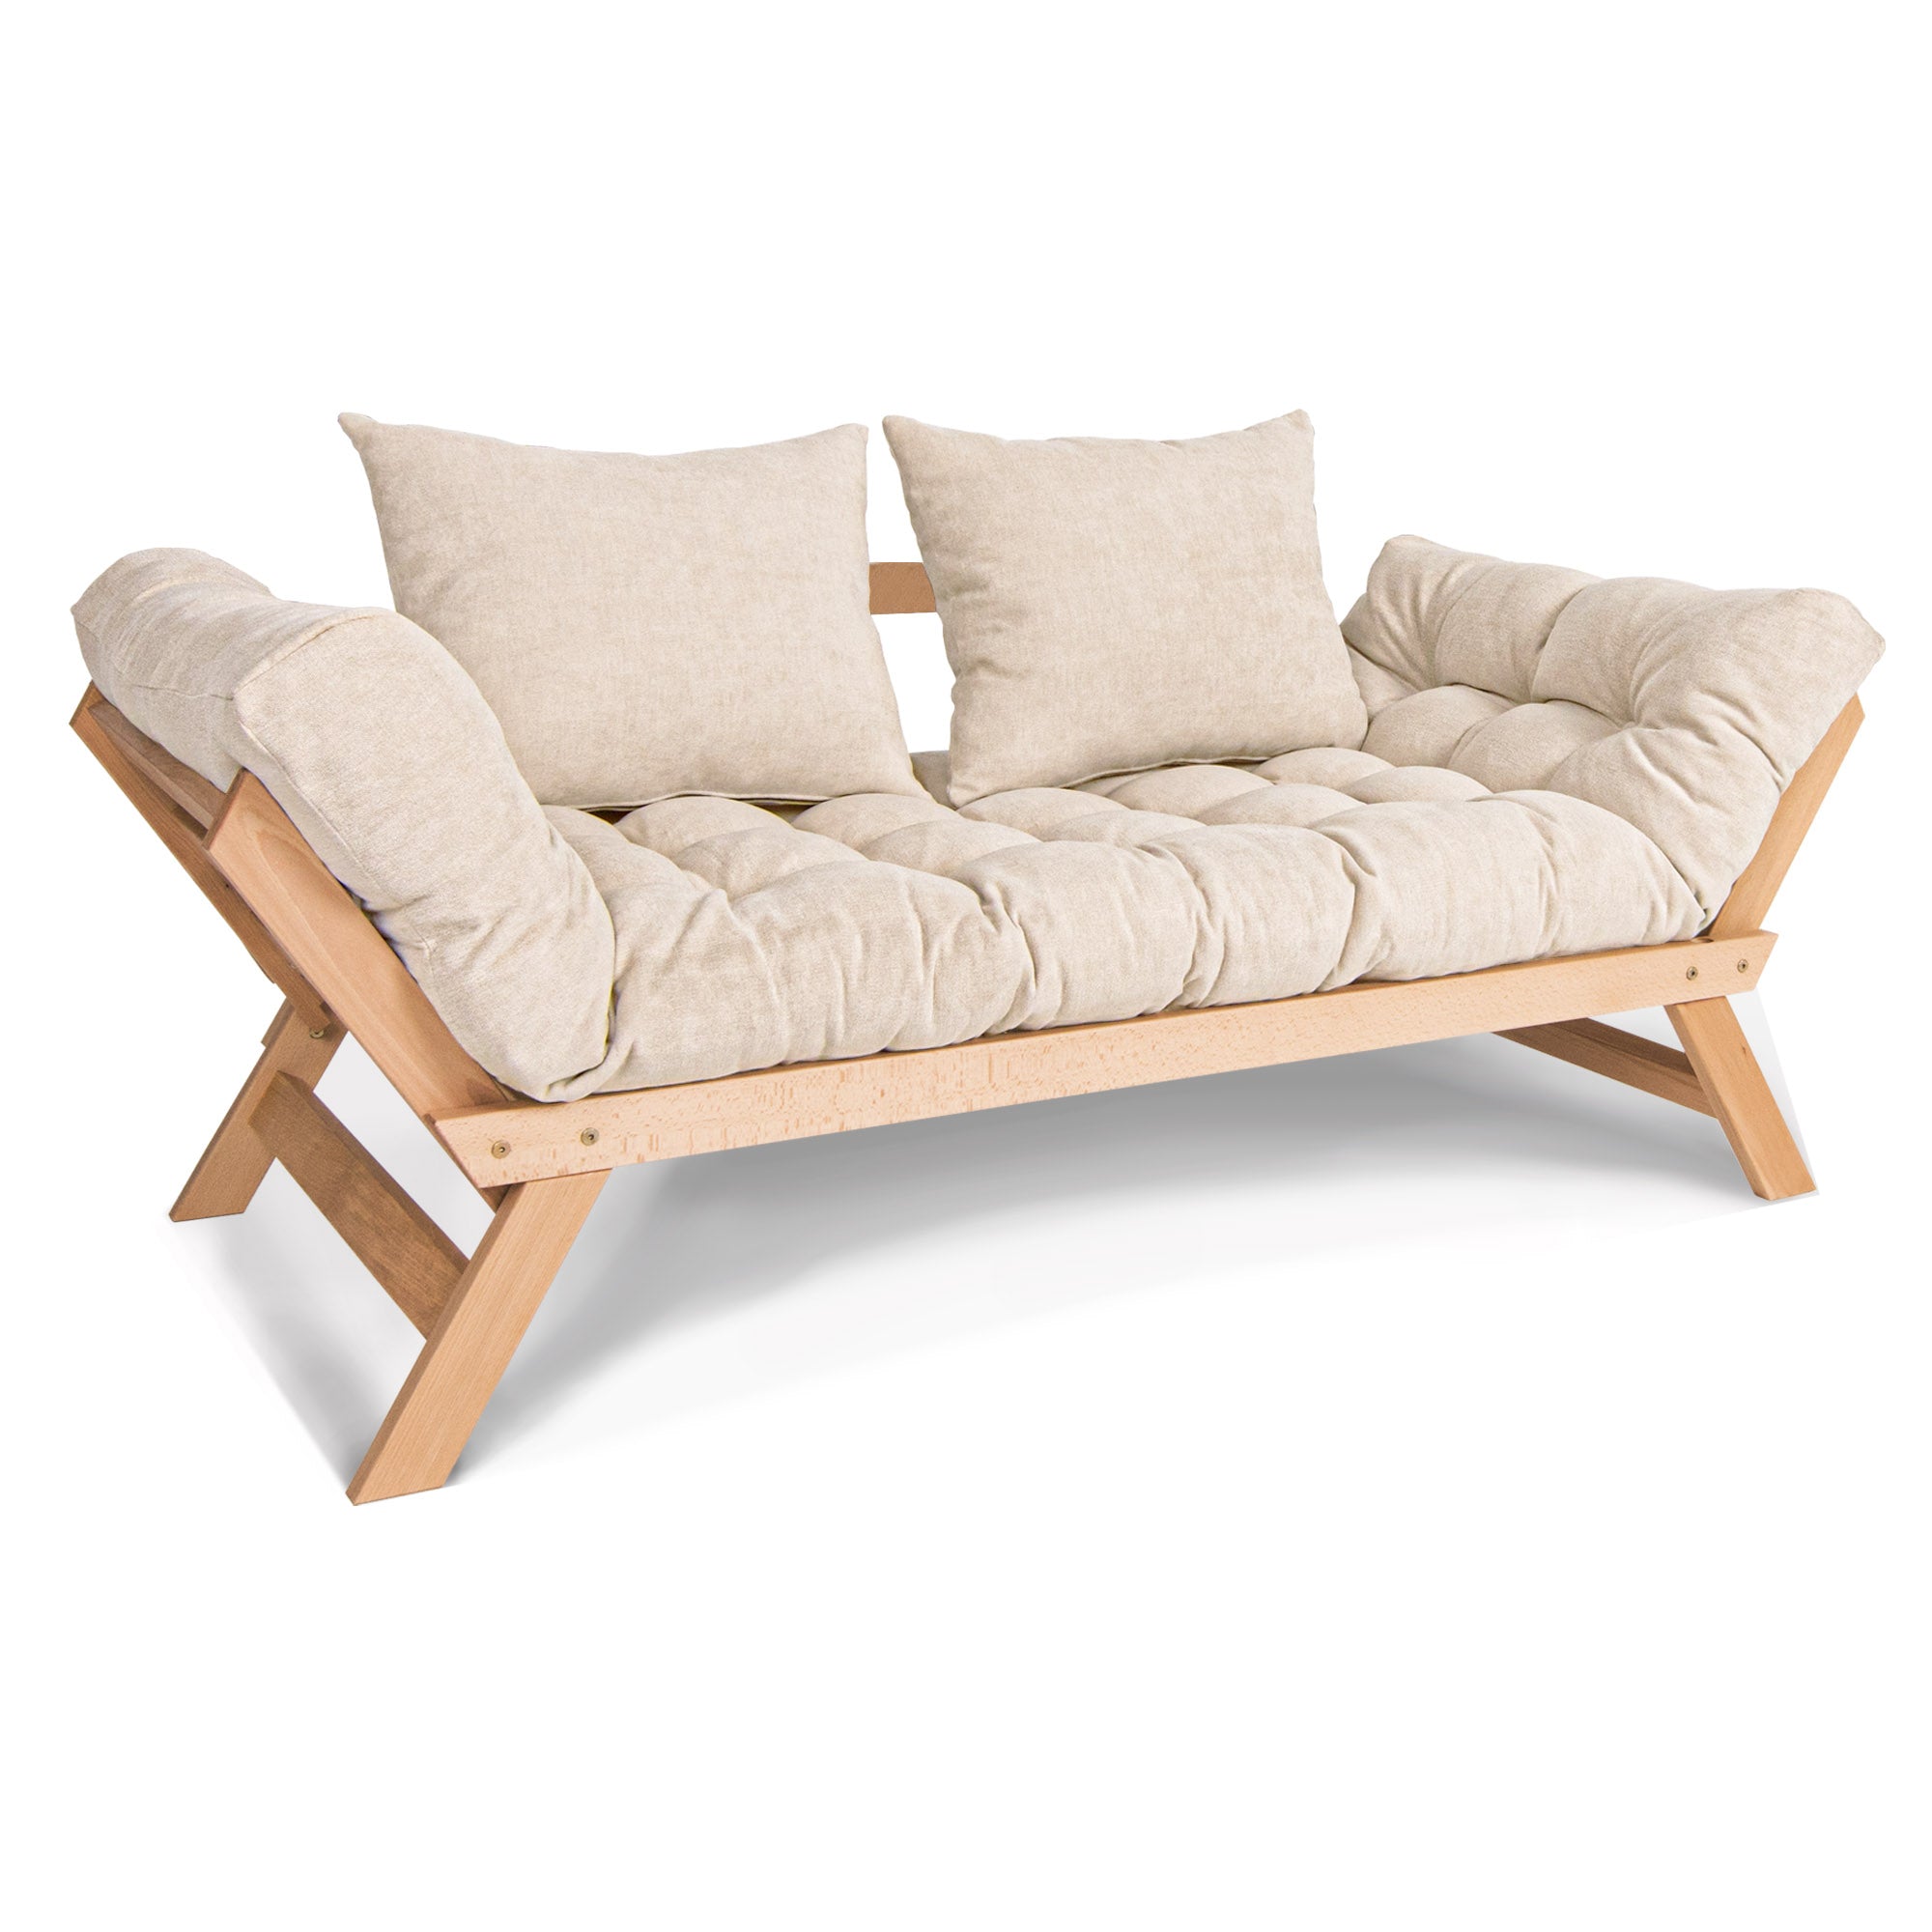 ALLEGRO Folding Sofa Bed, Beech Wood Frame, Natural Colour upholstery colour creamy